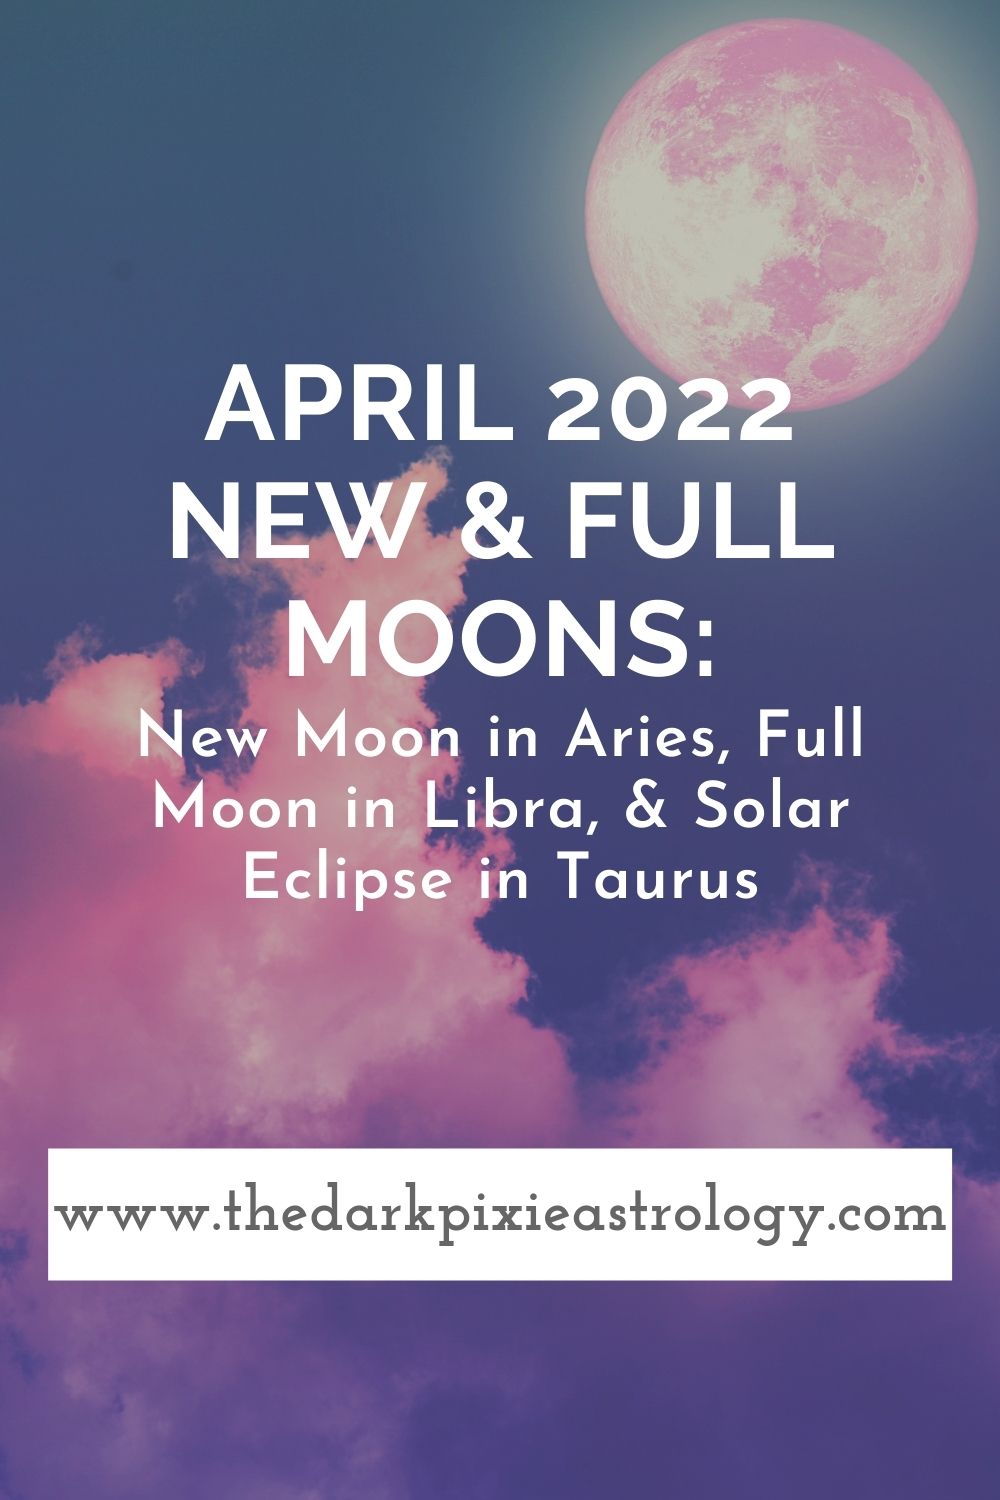 April 2022 New & Full Moons: New Moon in Aries, Full Moon in Libra, & Solar Eclipse in Taurus - The Dark Pixie Astrology